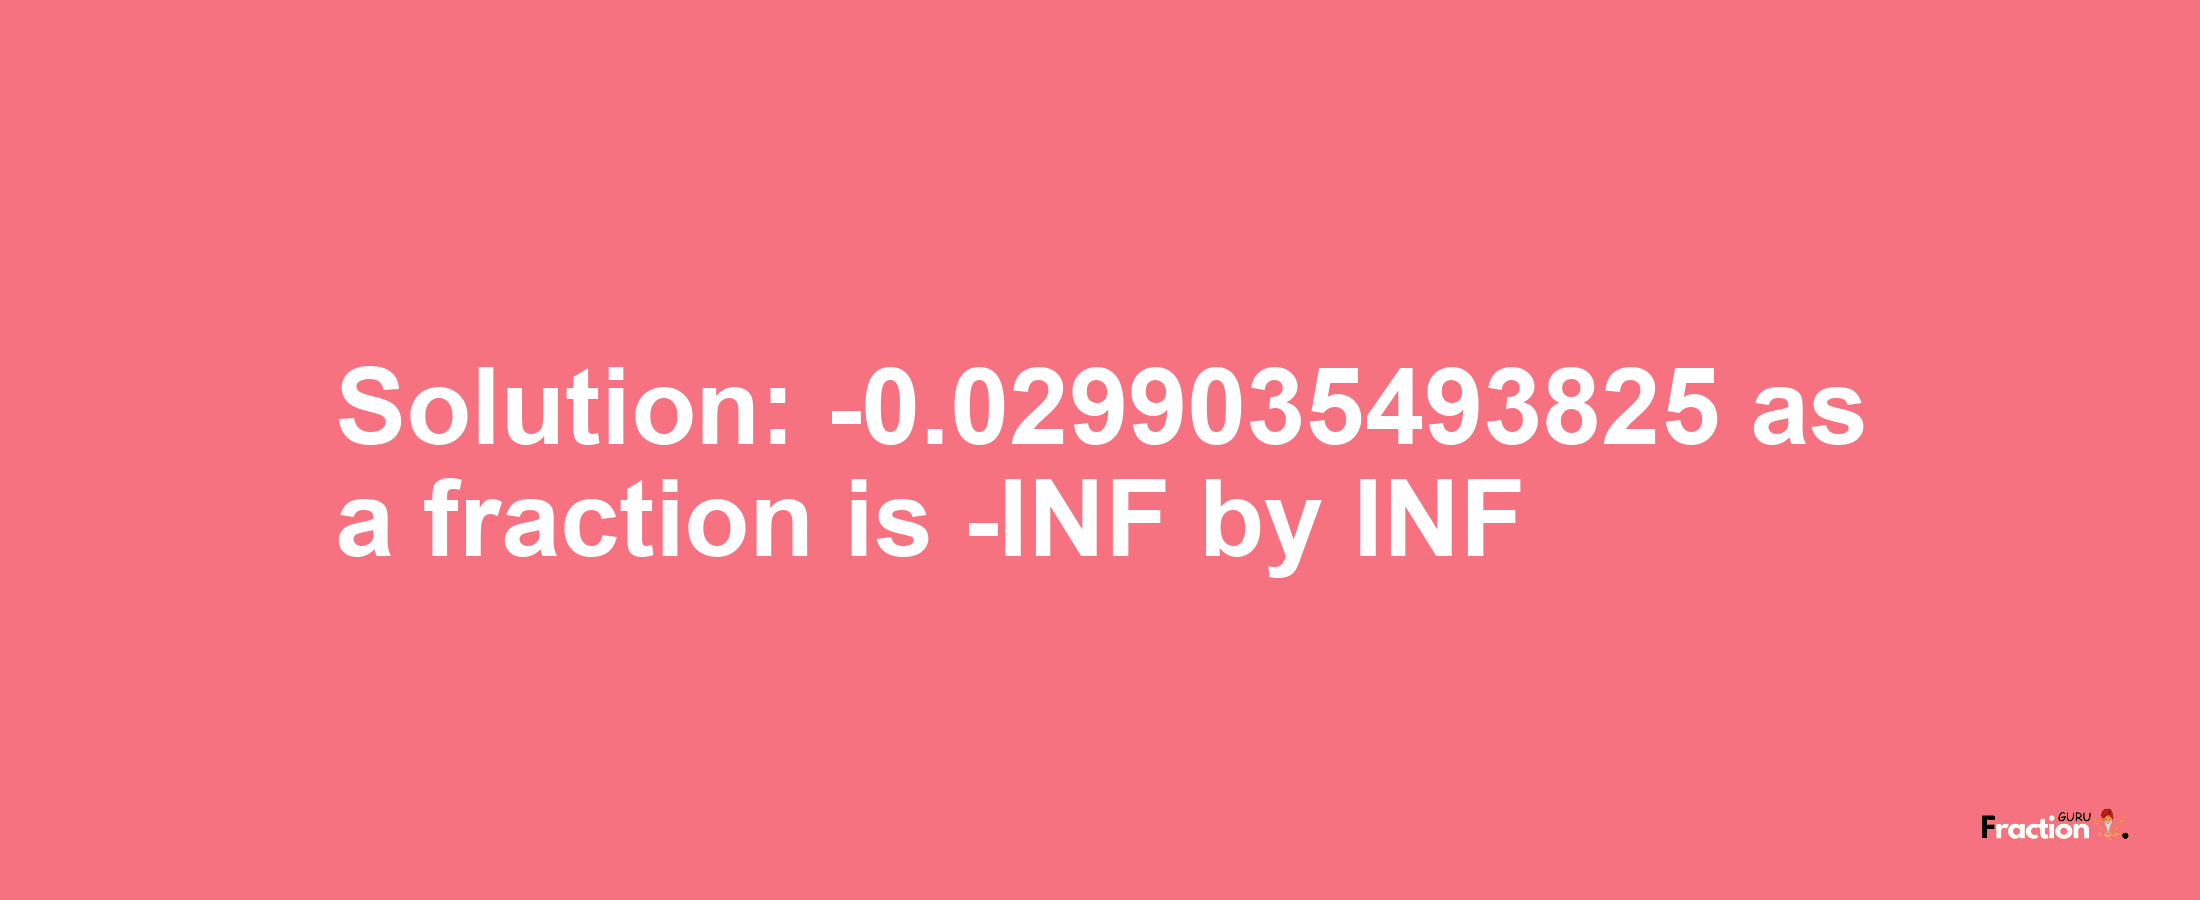 Solution:-0.0299035493825 as a fraction is -INF/INF